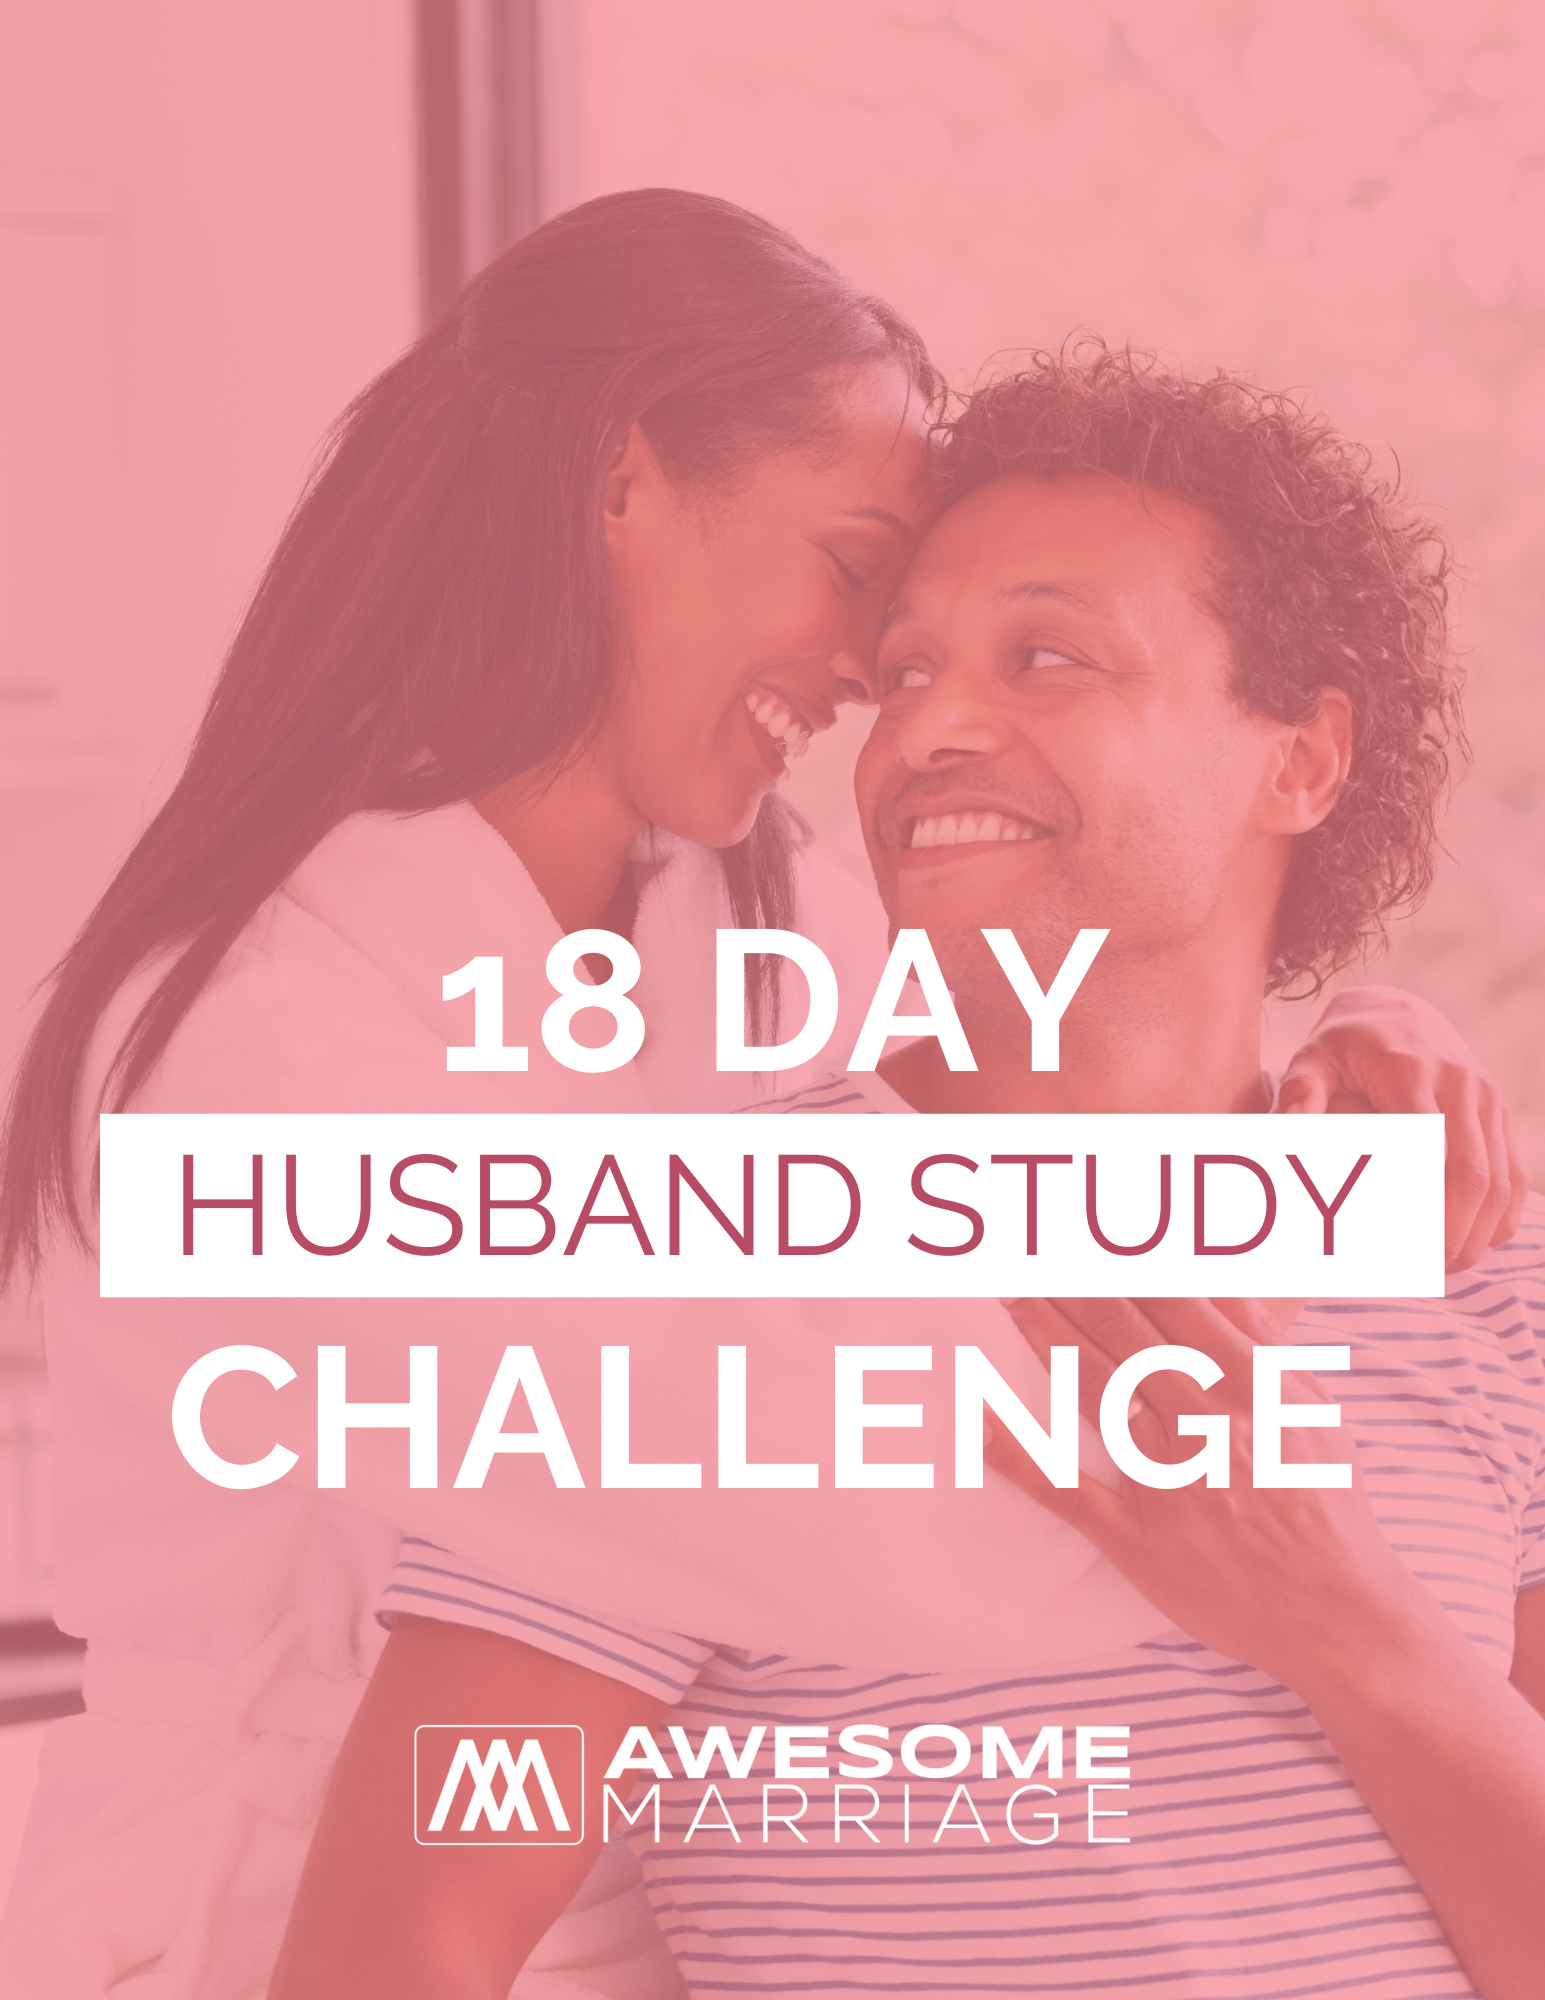 Marriage Multiplier On better sex, studying your husband, and being the Holy Spirit